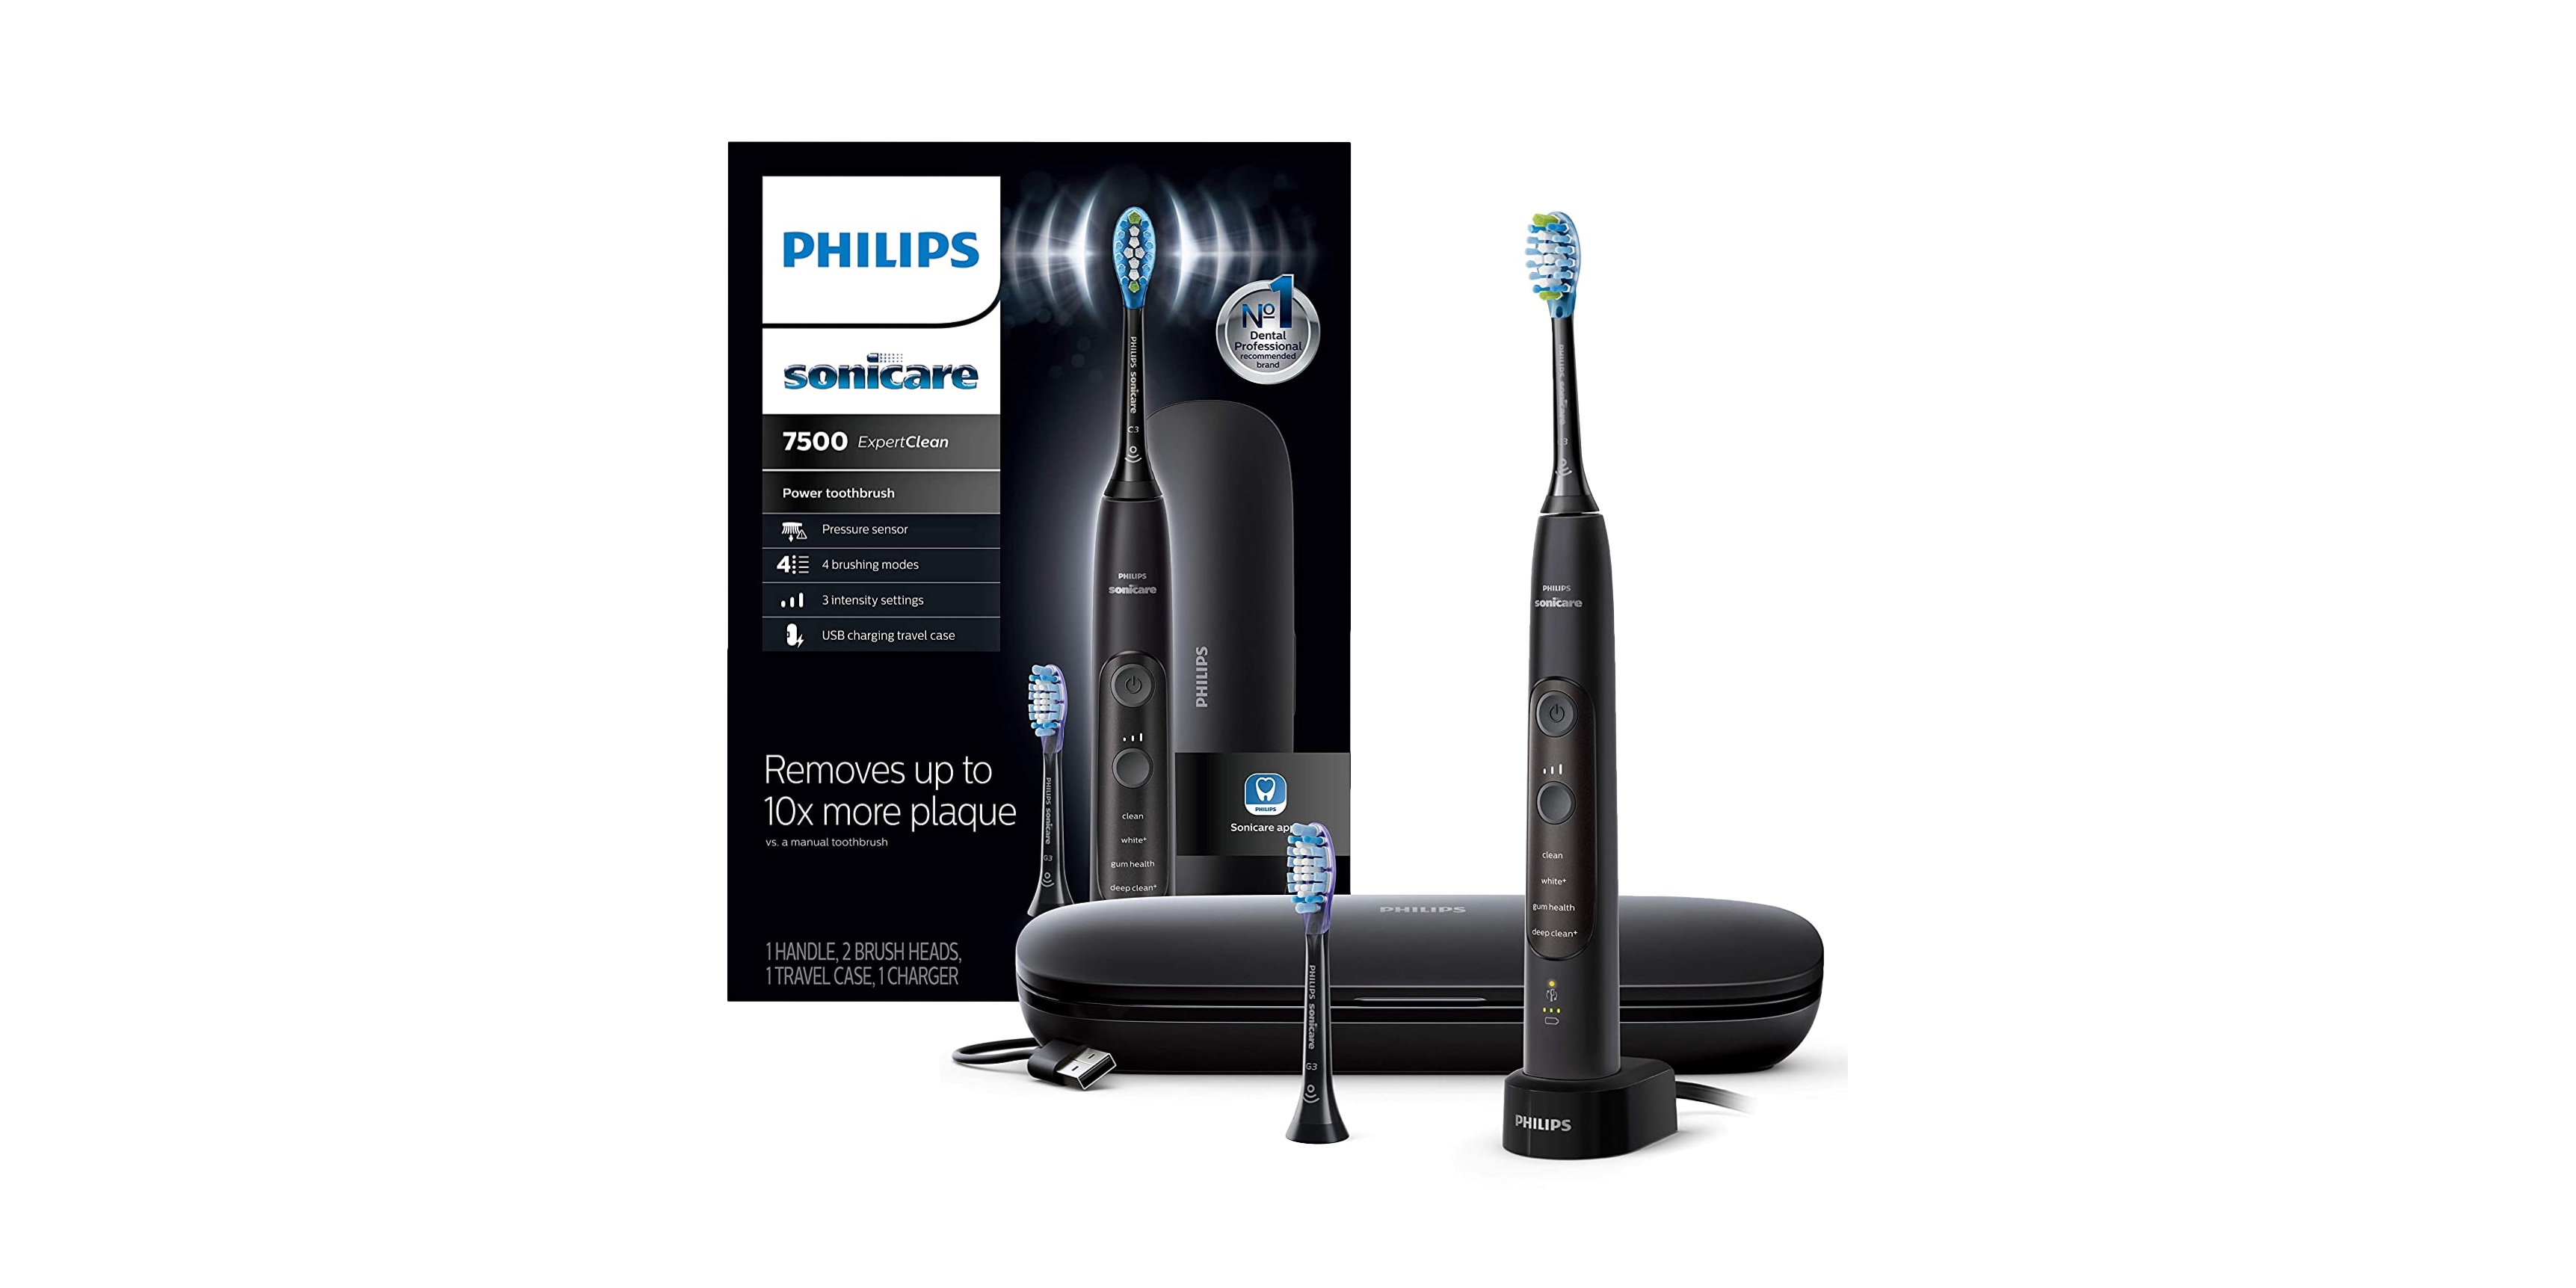 Toprated Philips Sonicare electric toothbrush hits Amazon low at 110